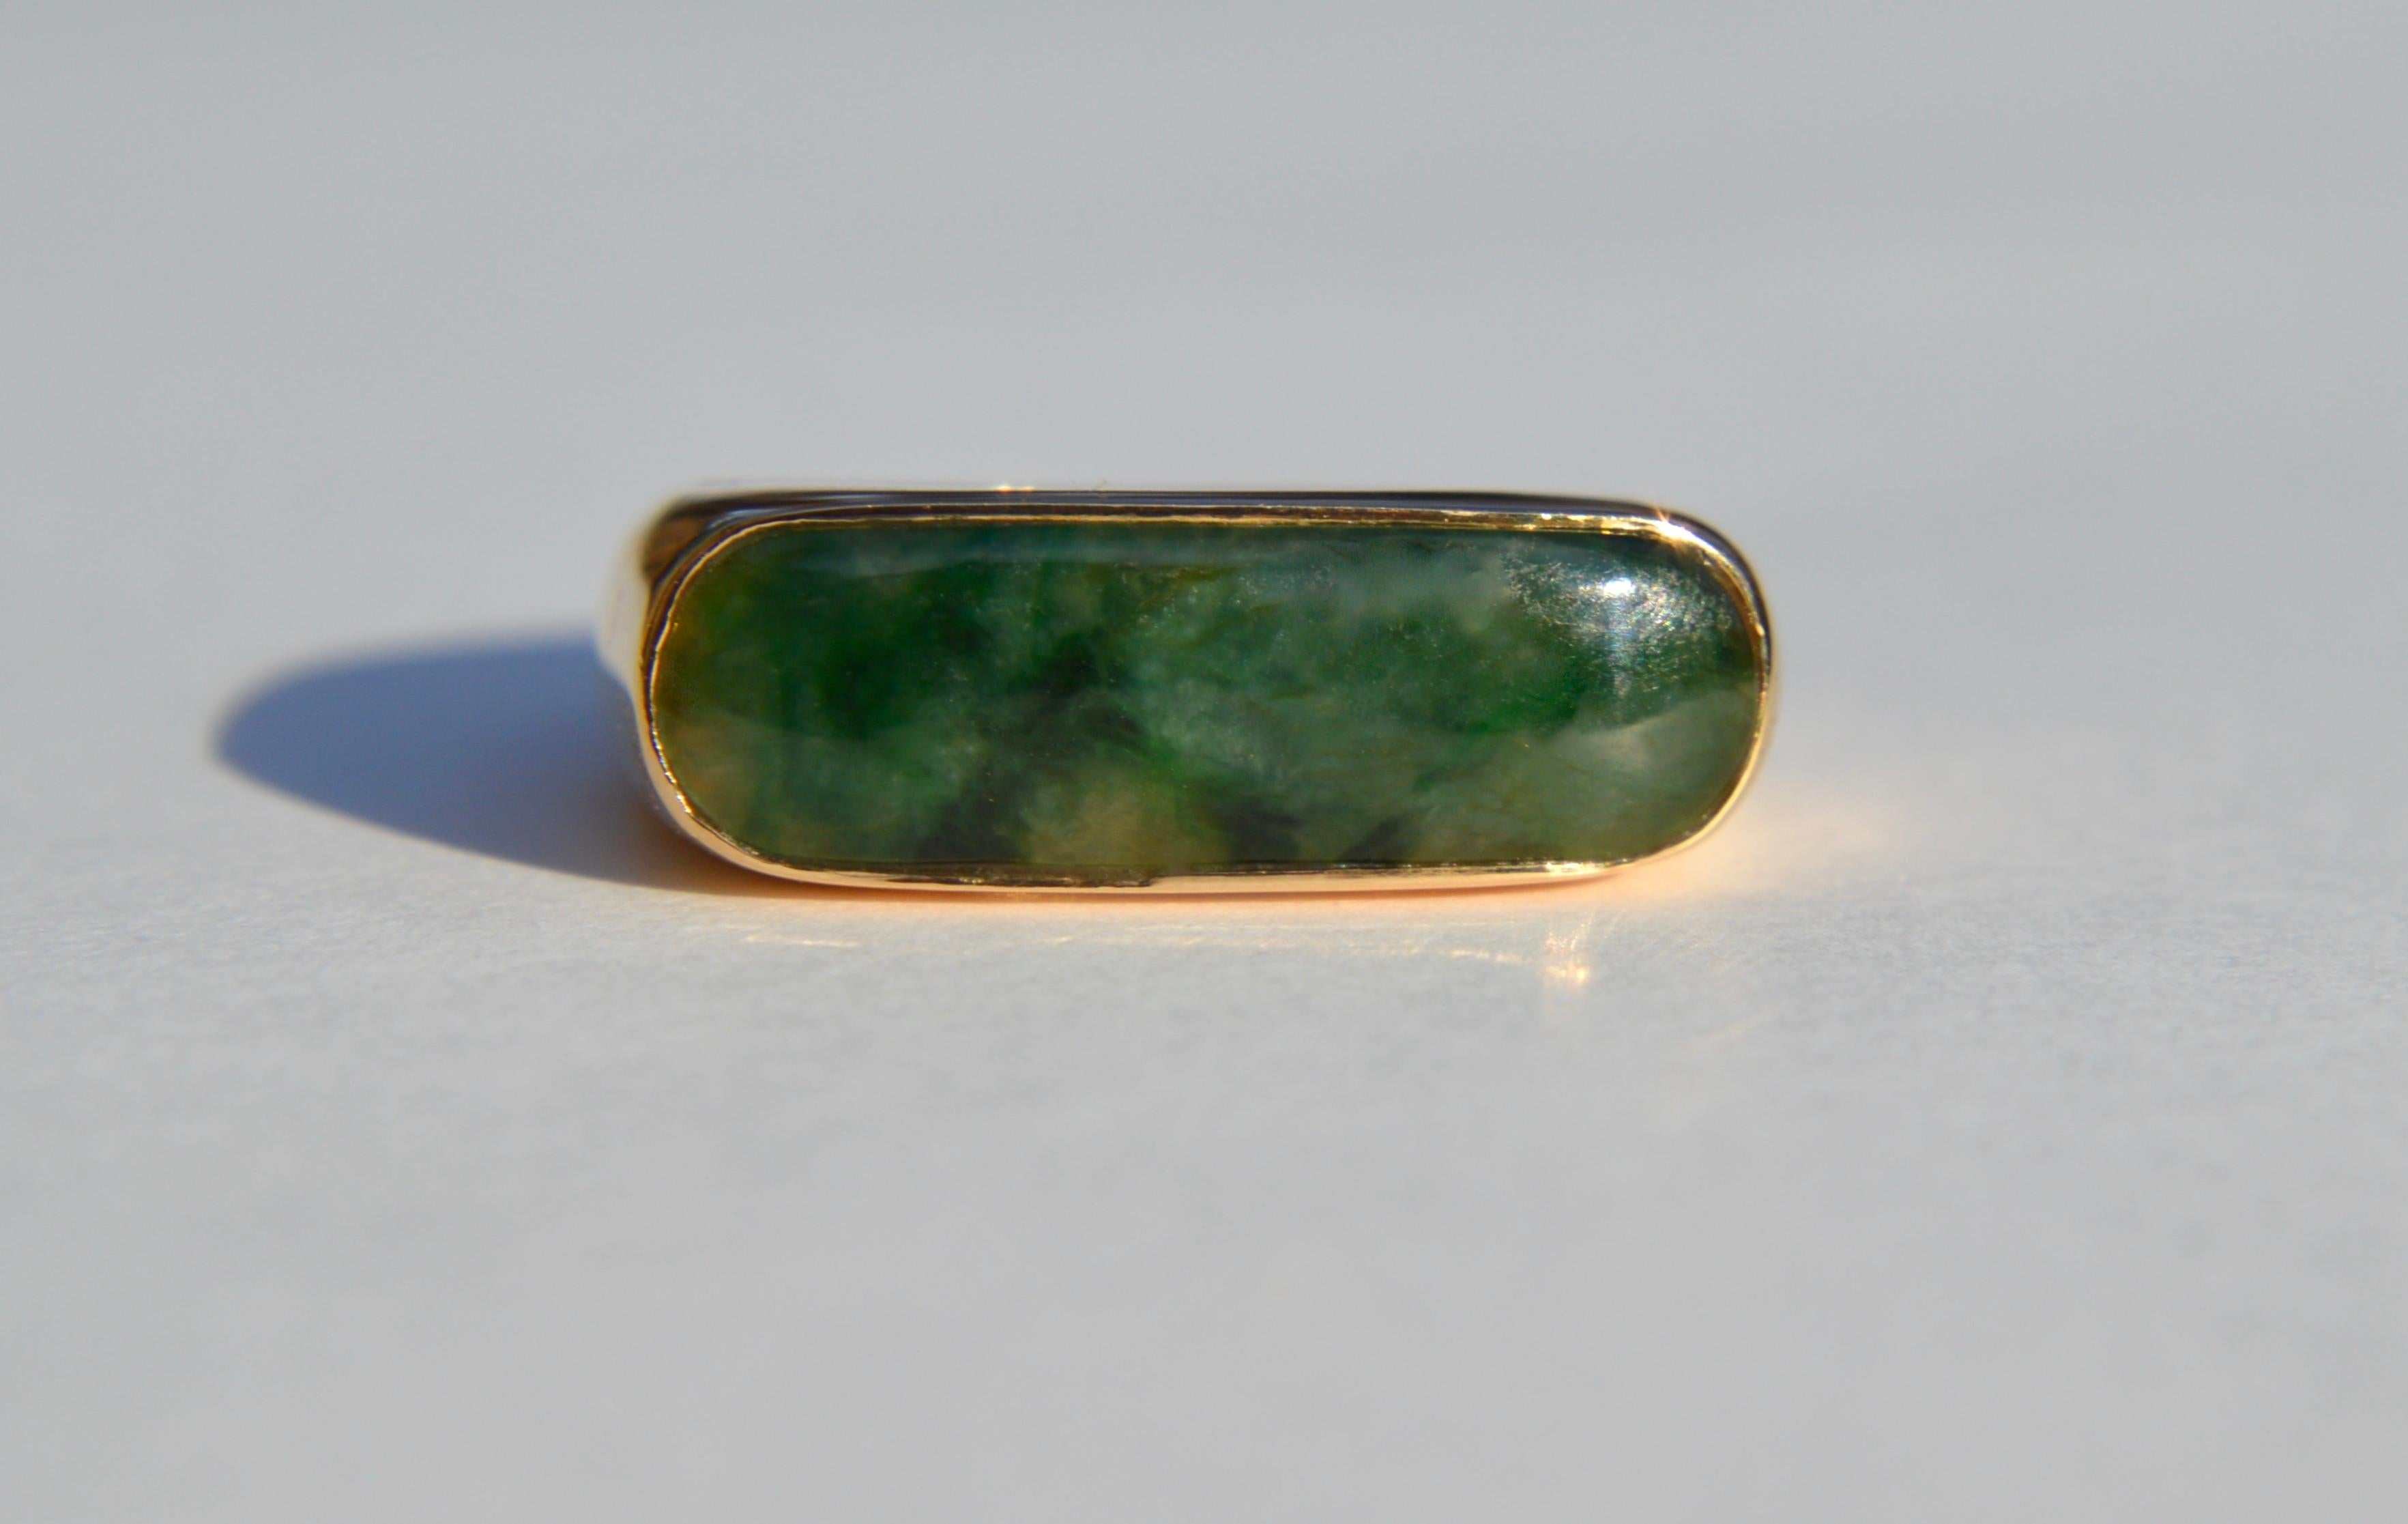 Beautiful vintage midcentury 1970s 18K yellow gold jade rectangular signet ring. In very good condition. Marked and tested as 750 for 18K gold. Also marked with Chinese symbols. Size 6.5. The lovely rich green nephrite jade measures 19x6mm. Ring